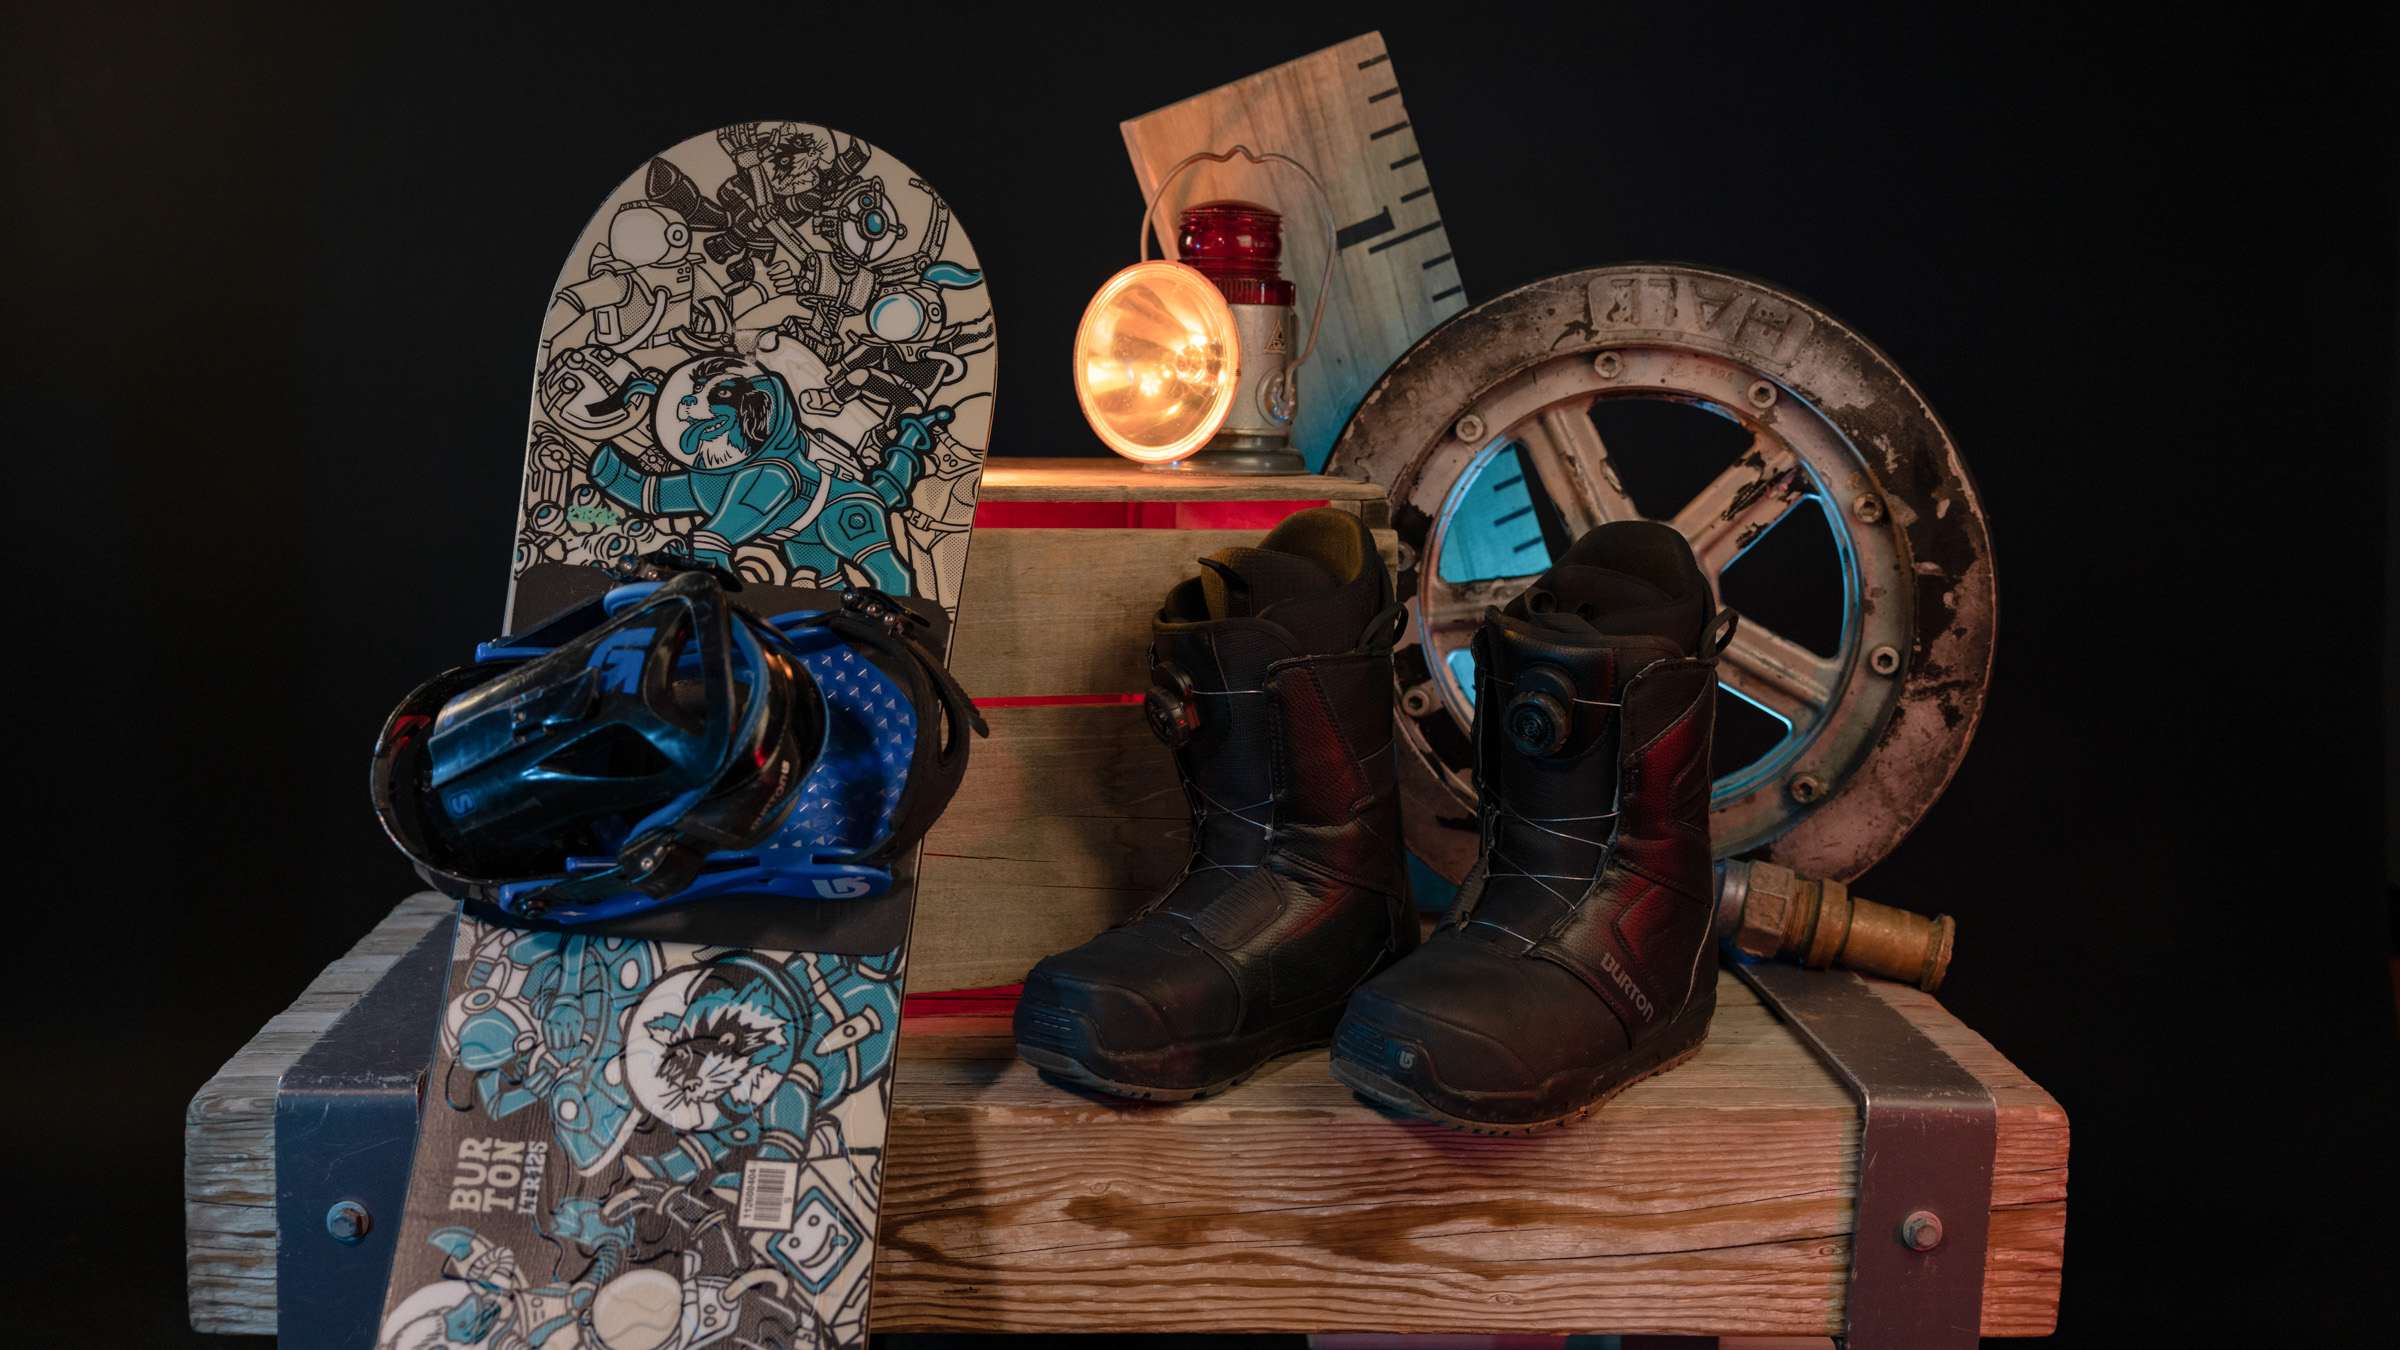 Snowboard with bindings and boots displayed on wooden table